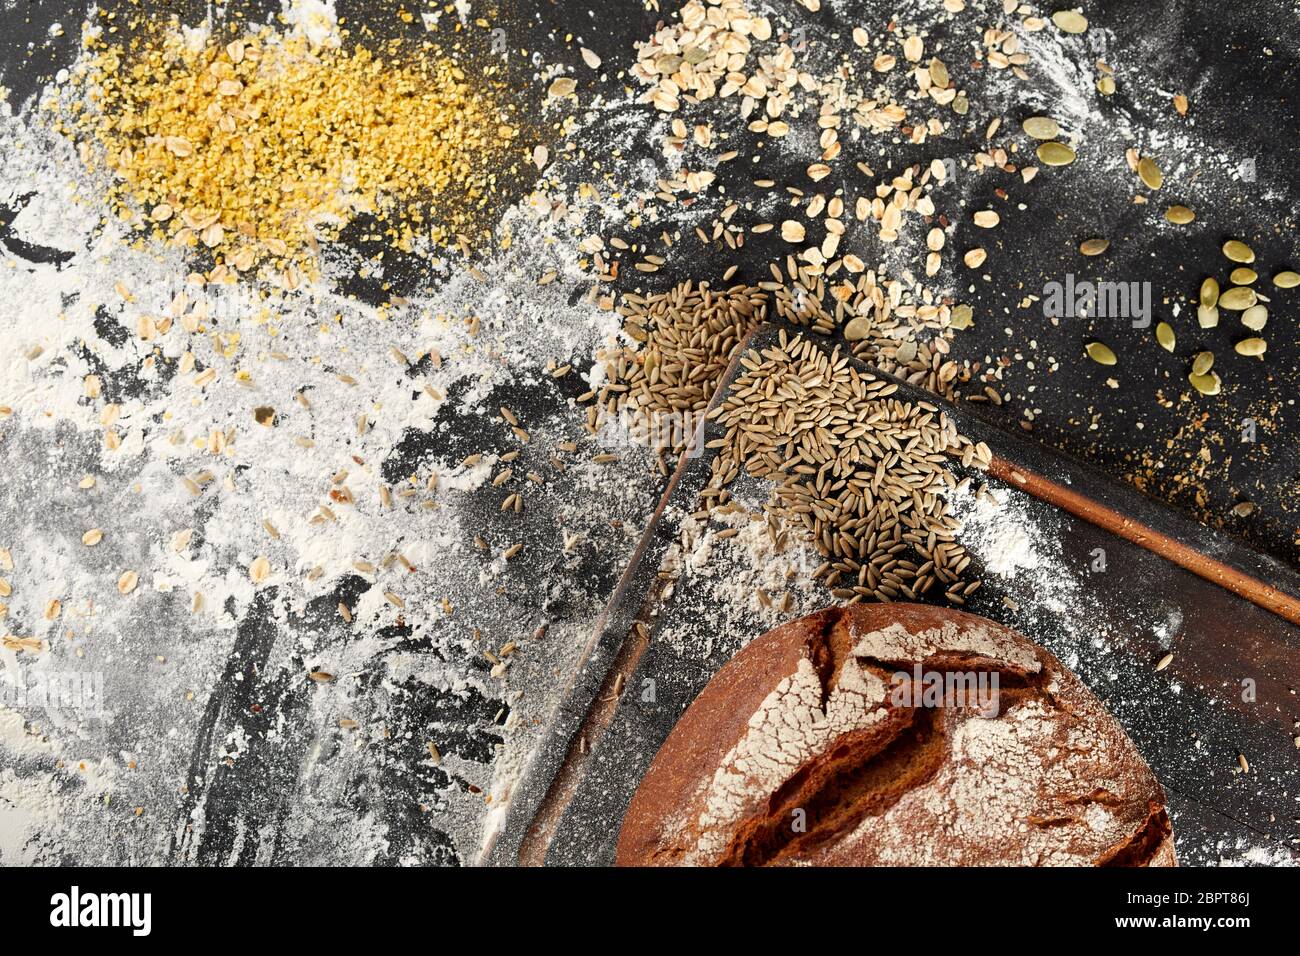 Assorted grain seeds with a freshly baked crusty loaf of bread and flour on a messy kitchen counter viewed from above Stock Photo